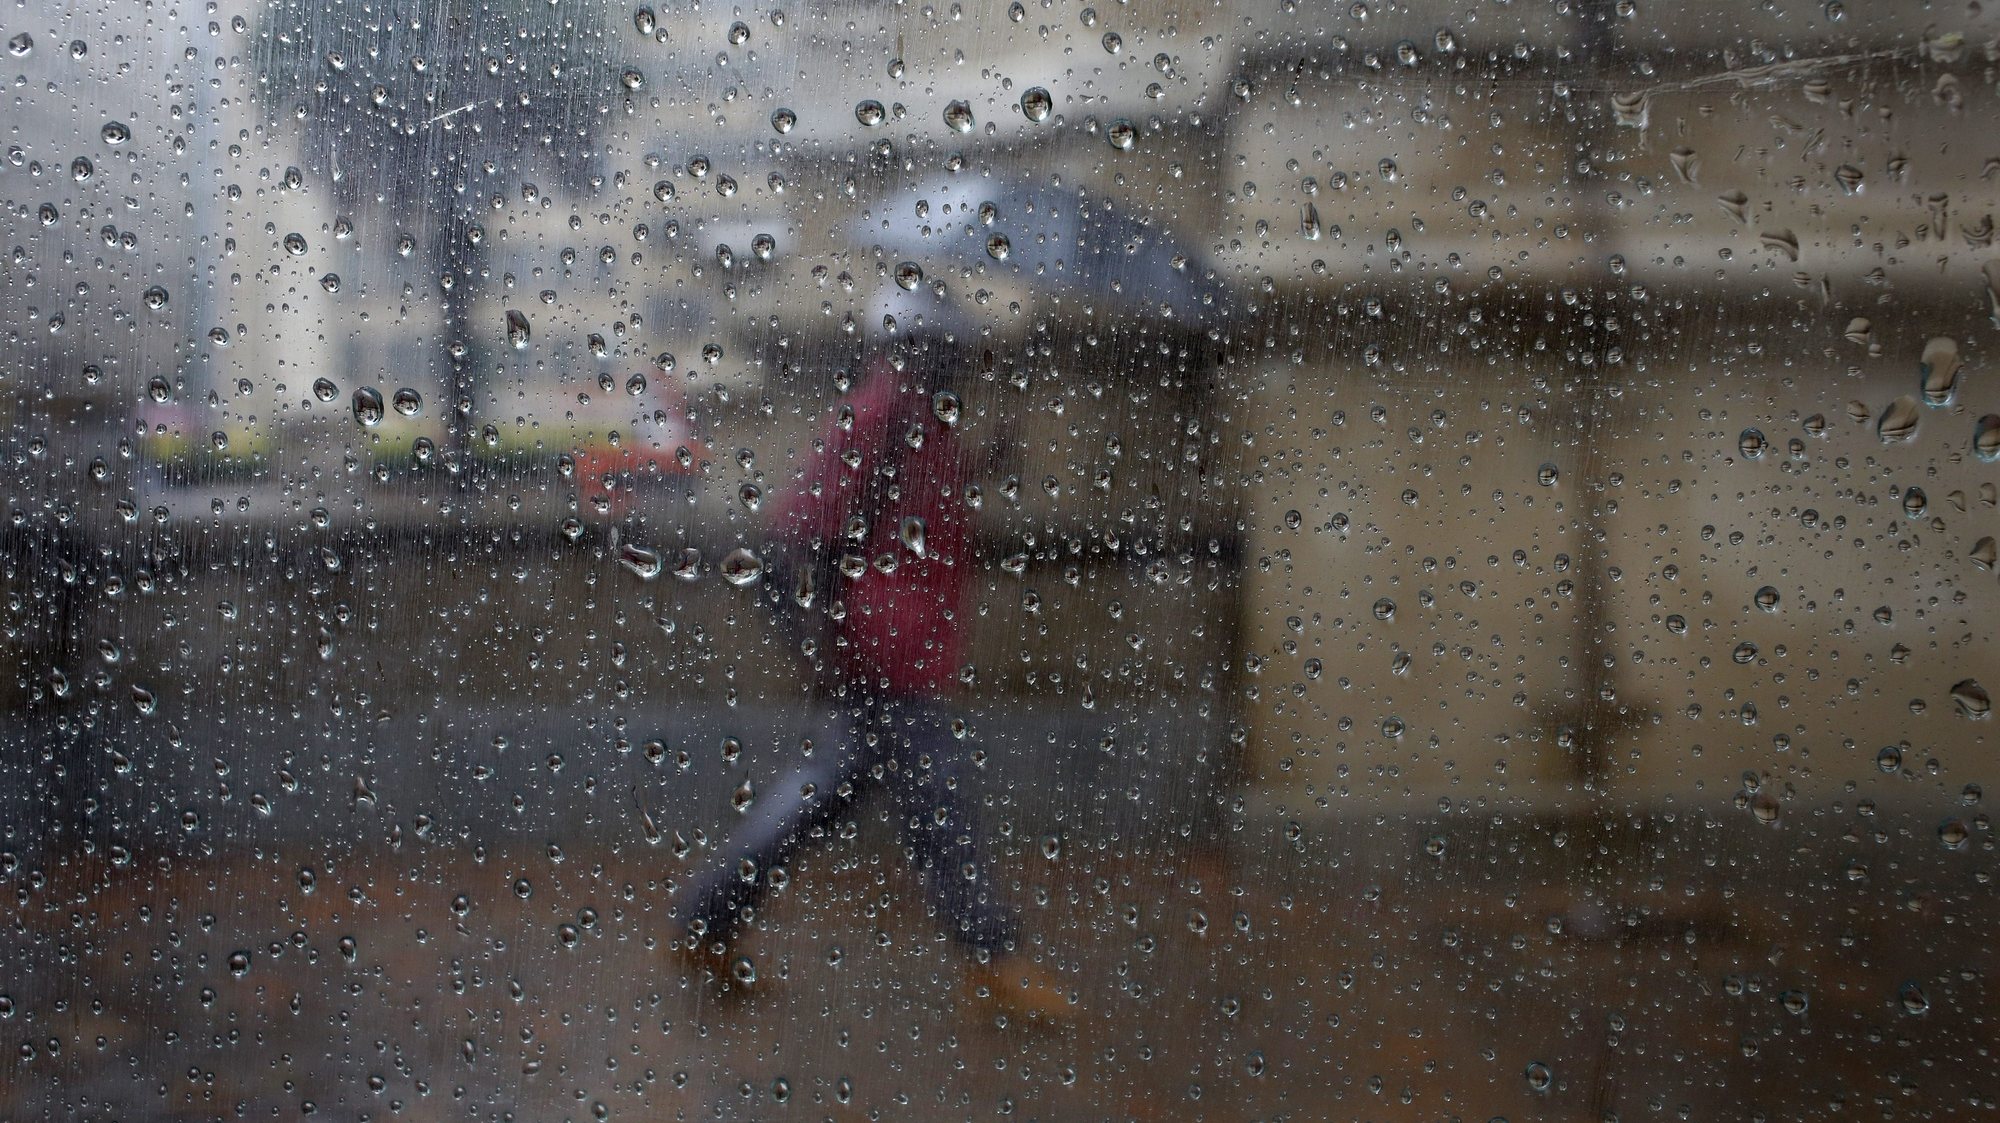 epa05703355 A man walks with an umbrella as heavy rains continue to fall over the majority of central areas of Southern Africa, Johannesburg, South Africa, 07 January 2017. Flash floods have been reported in areas around Johannesburg as the heavy rain is due to continue until early next week.  EPA/KIM LUDBROOK